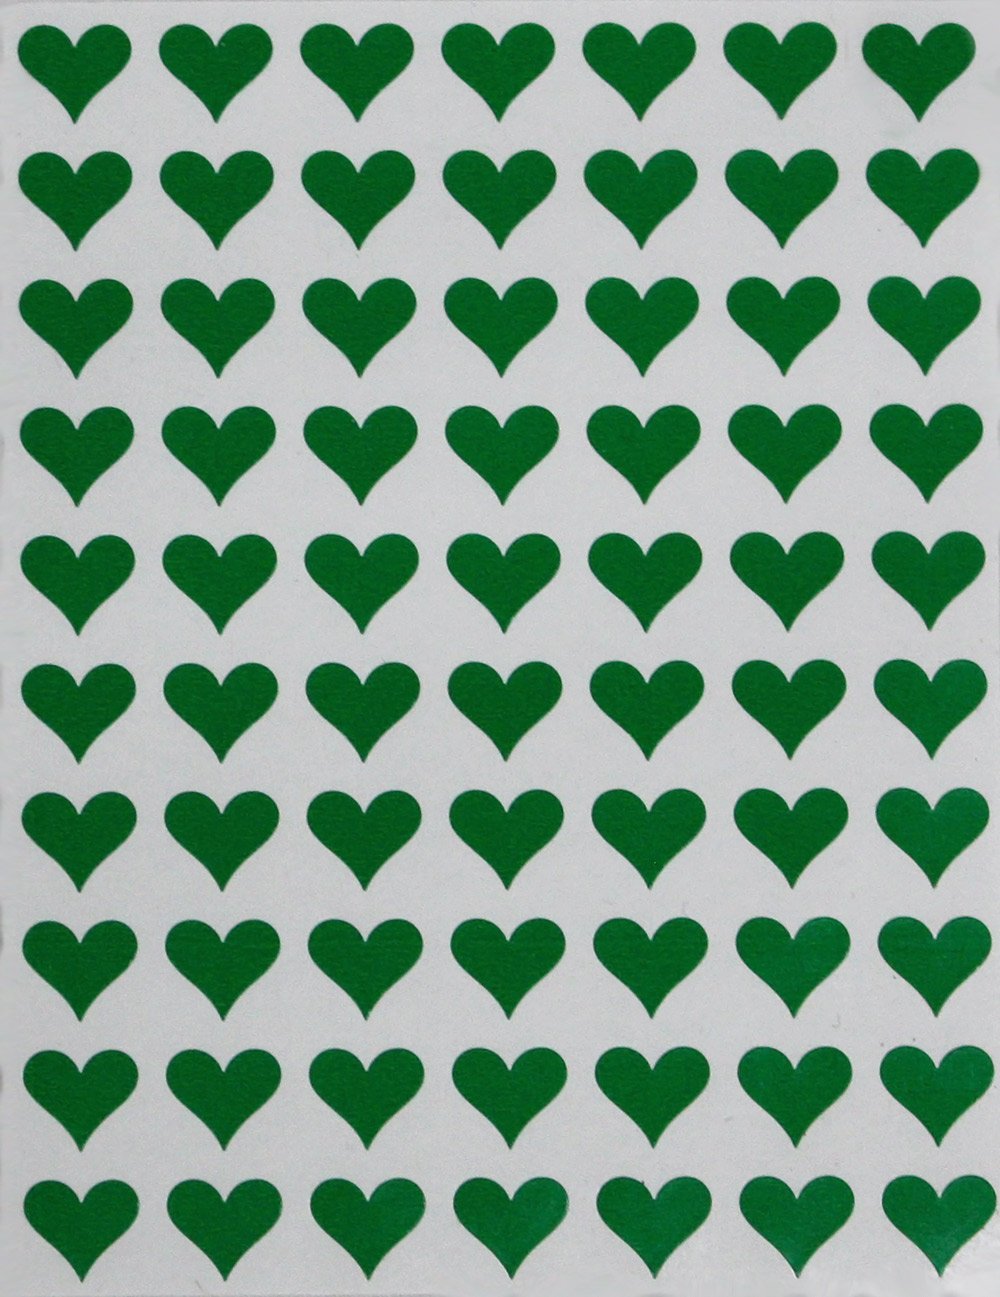 Royal Green Small Heart Stickers Roll 1/2 inch Heart Sticker for  Stationery, Gift Packaging, and Party Favors in Green (13mm) - 1250 Pack 